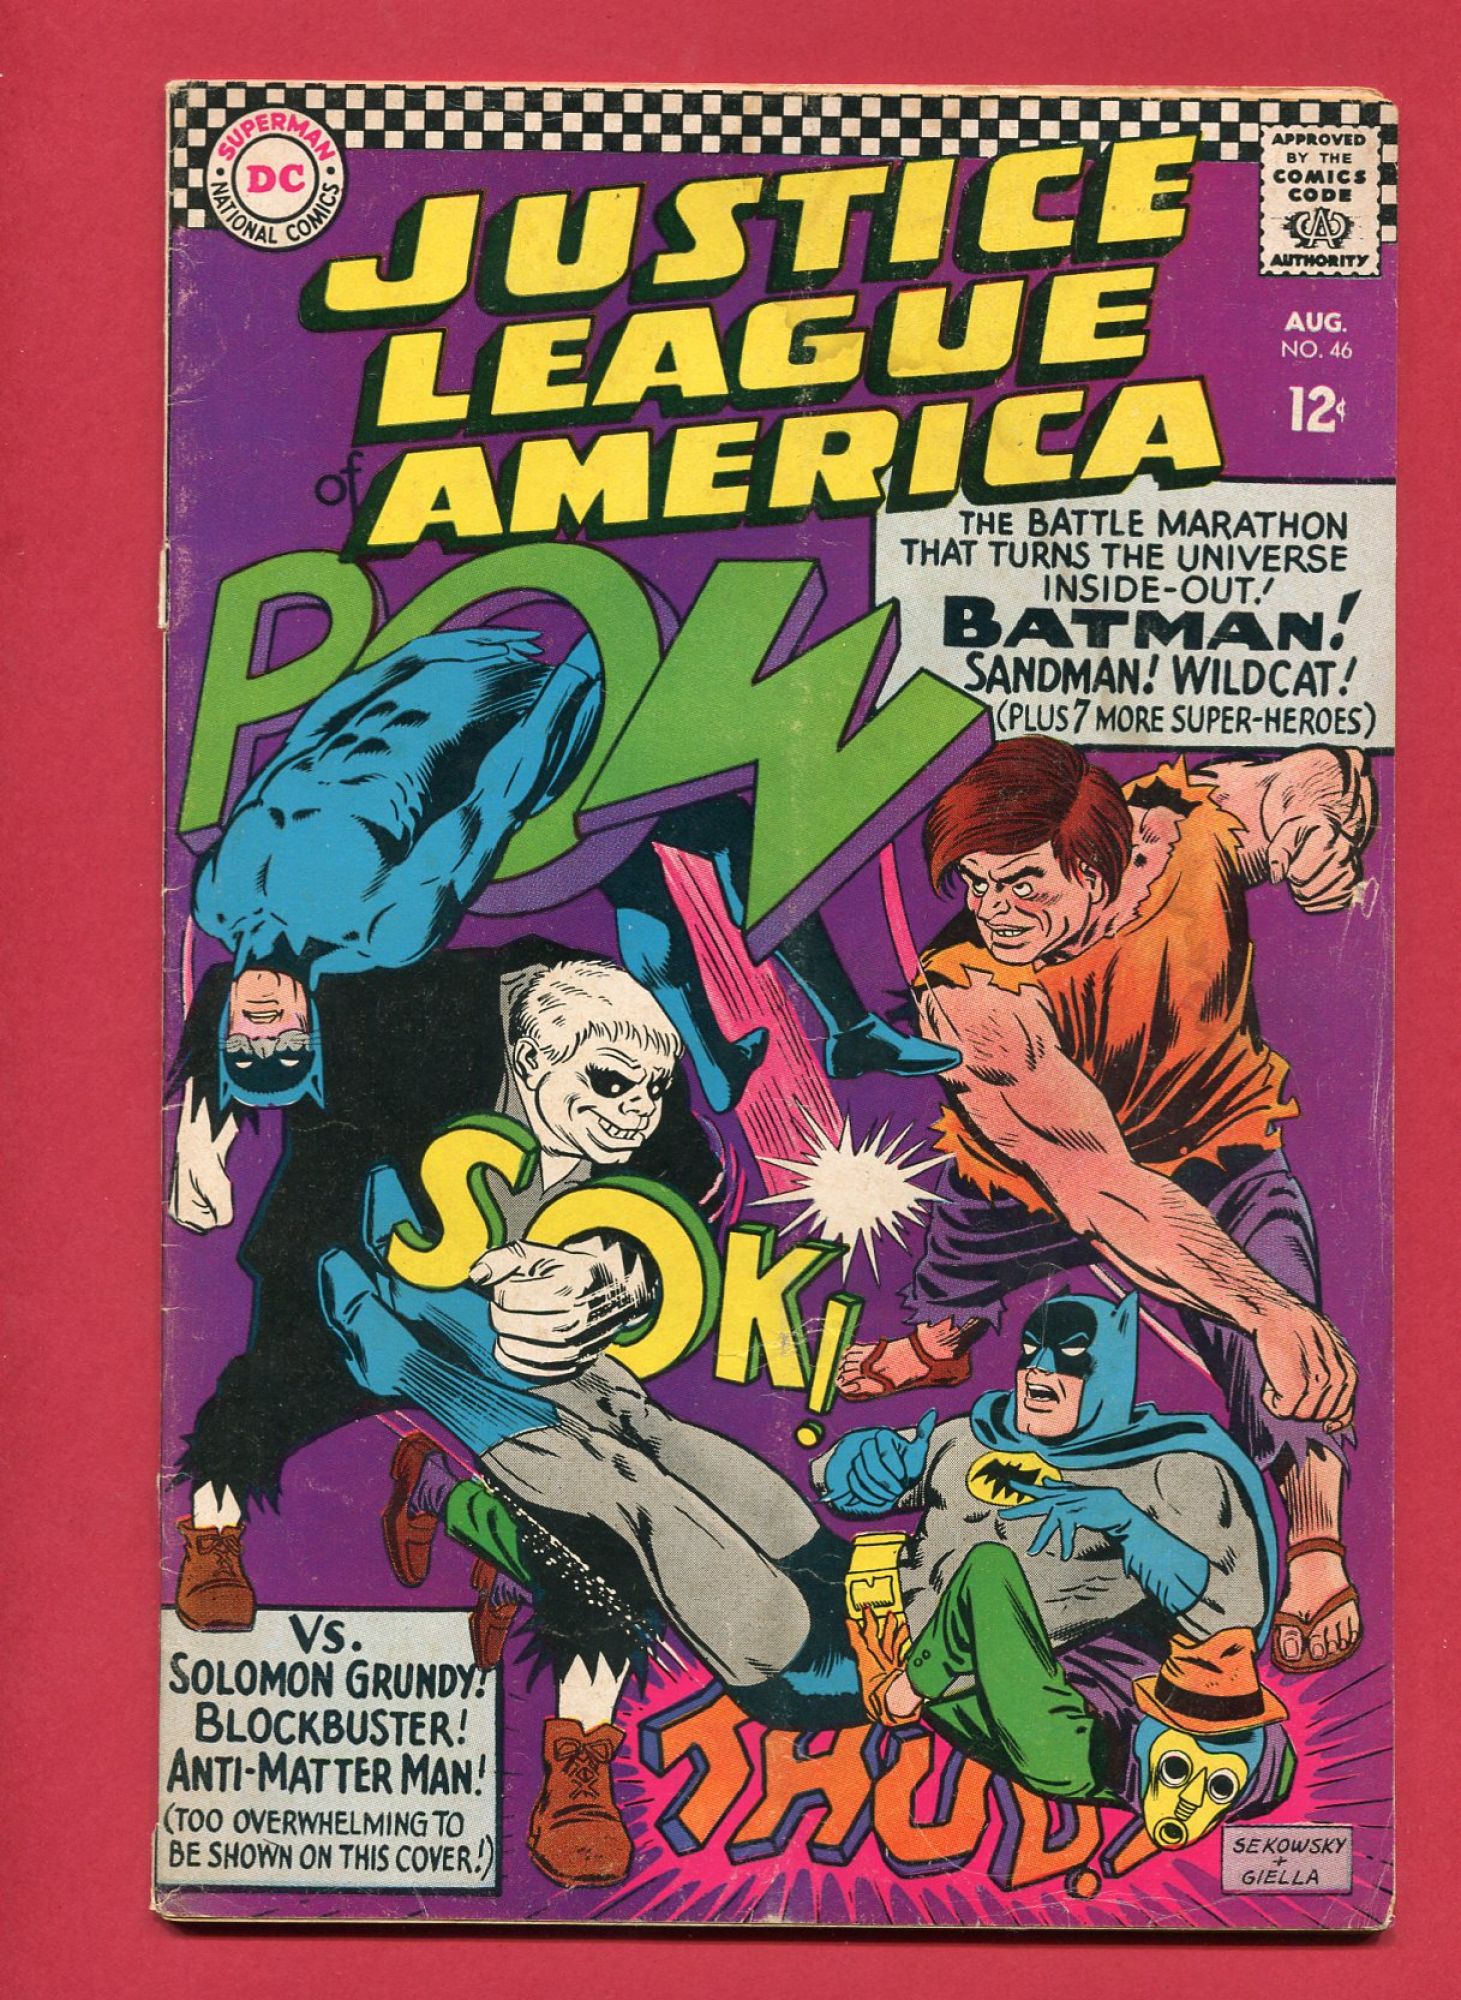 Justice League of America #46, Aug 1966, 3.0 GD/VG